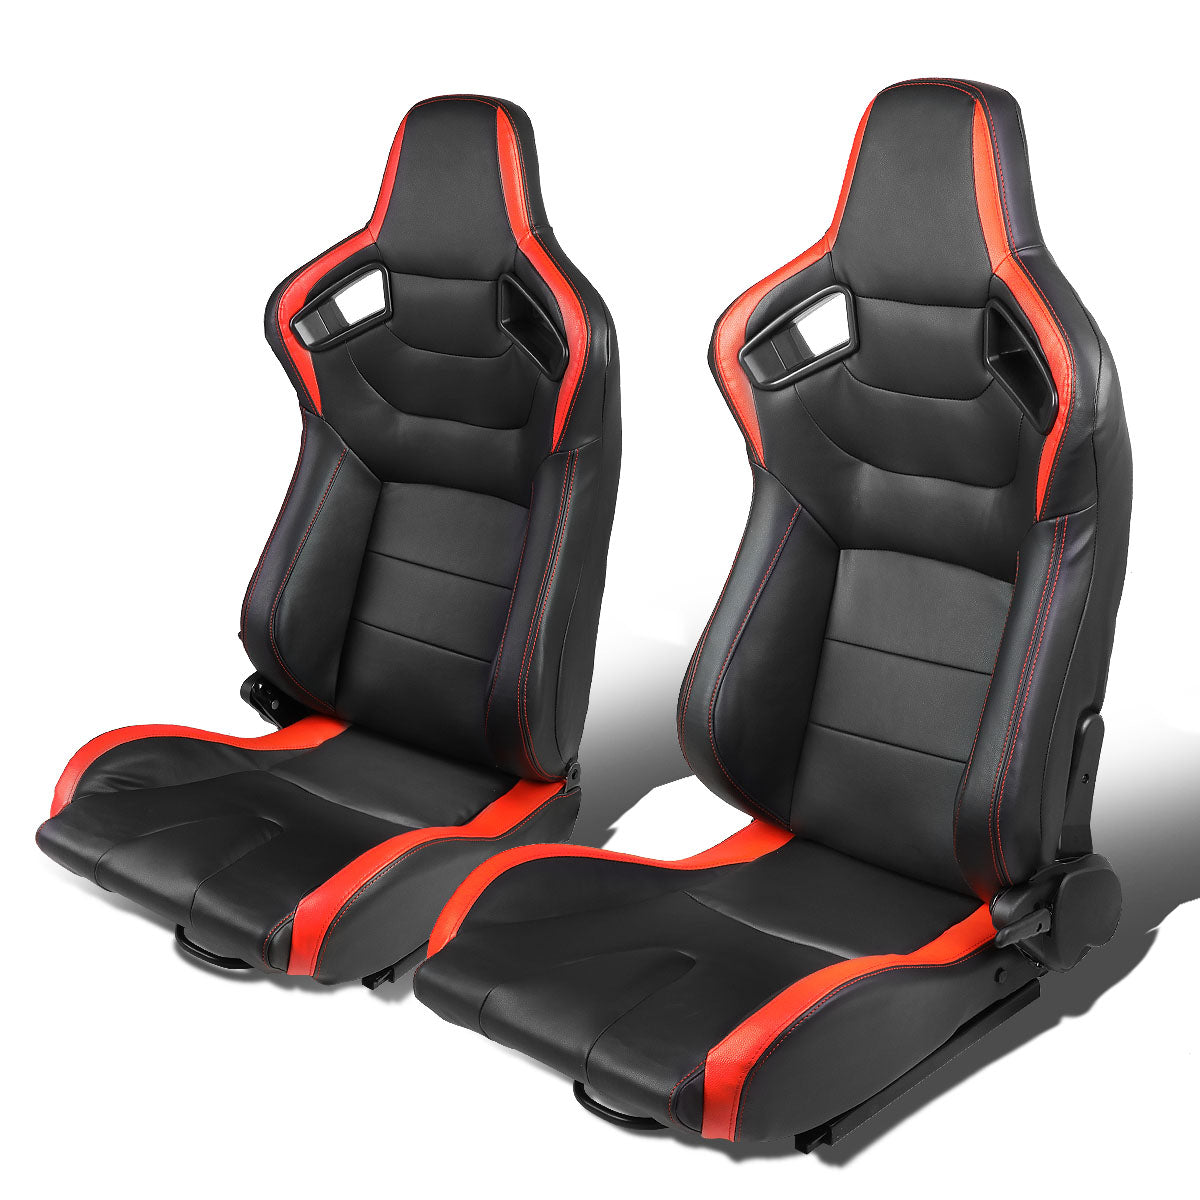 Racing Seats - Reclinable - Horizontal Stitch - PVC Leather - Pair